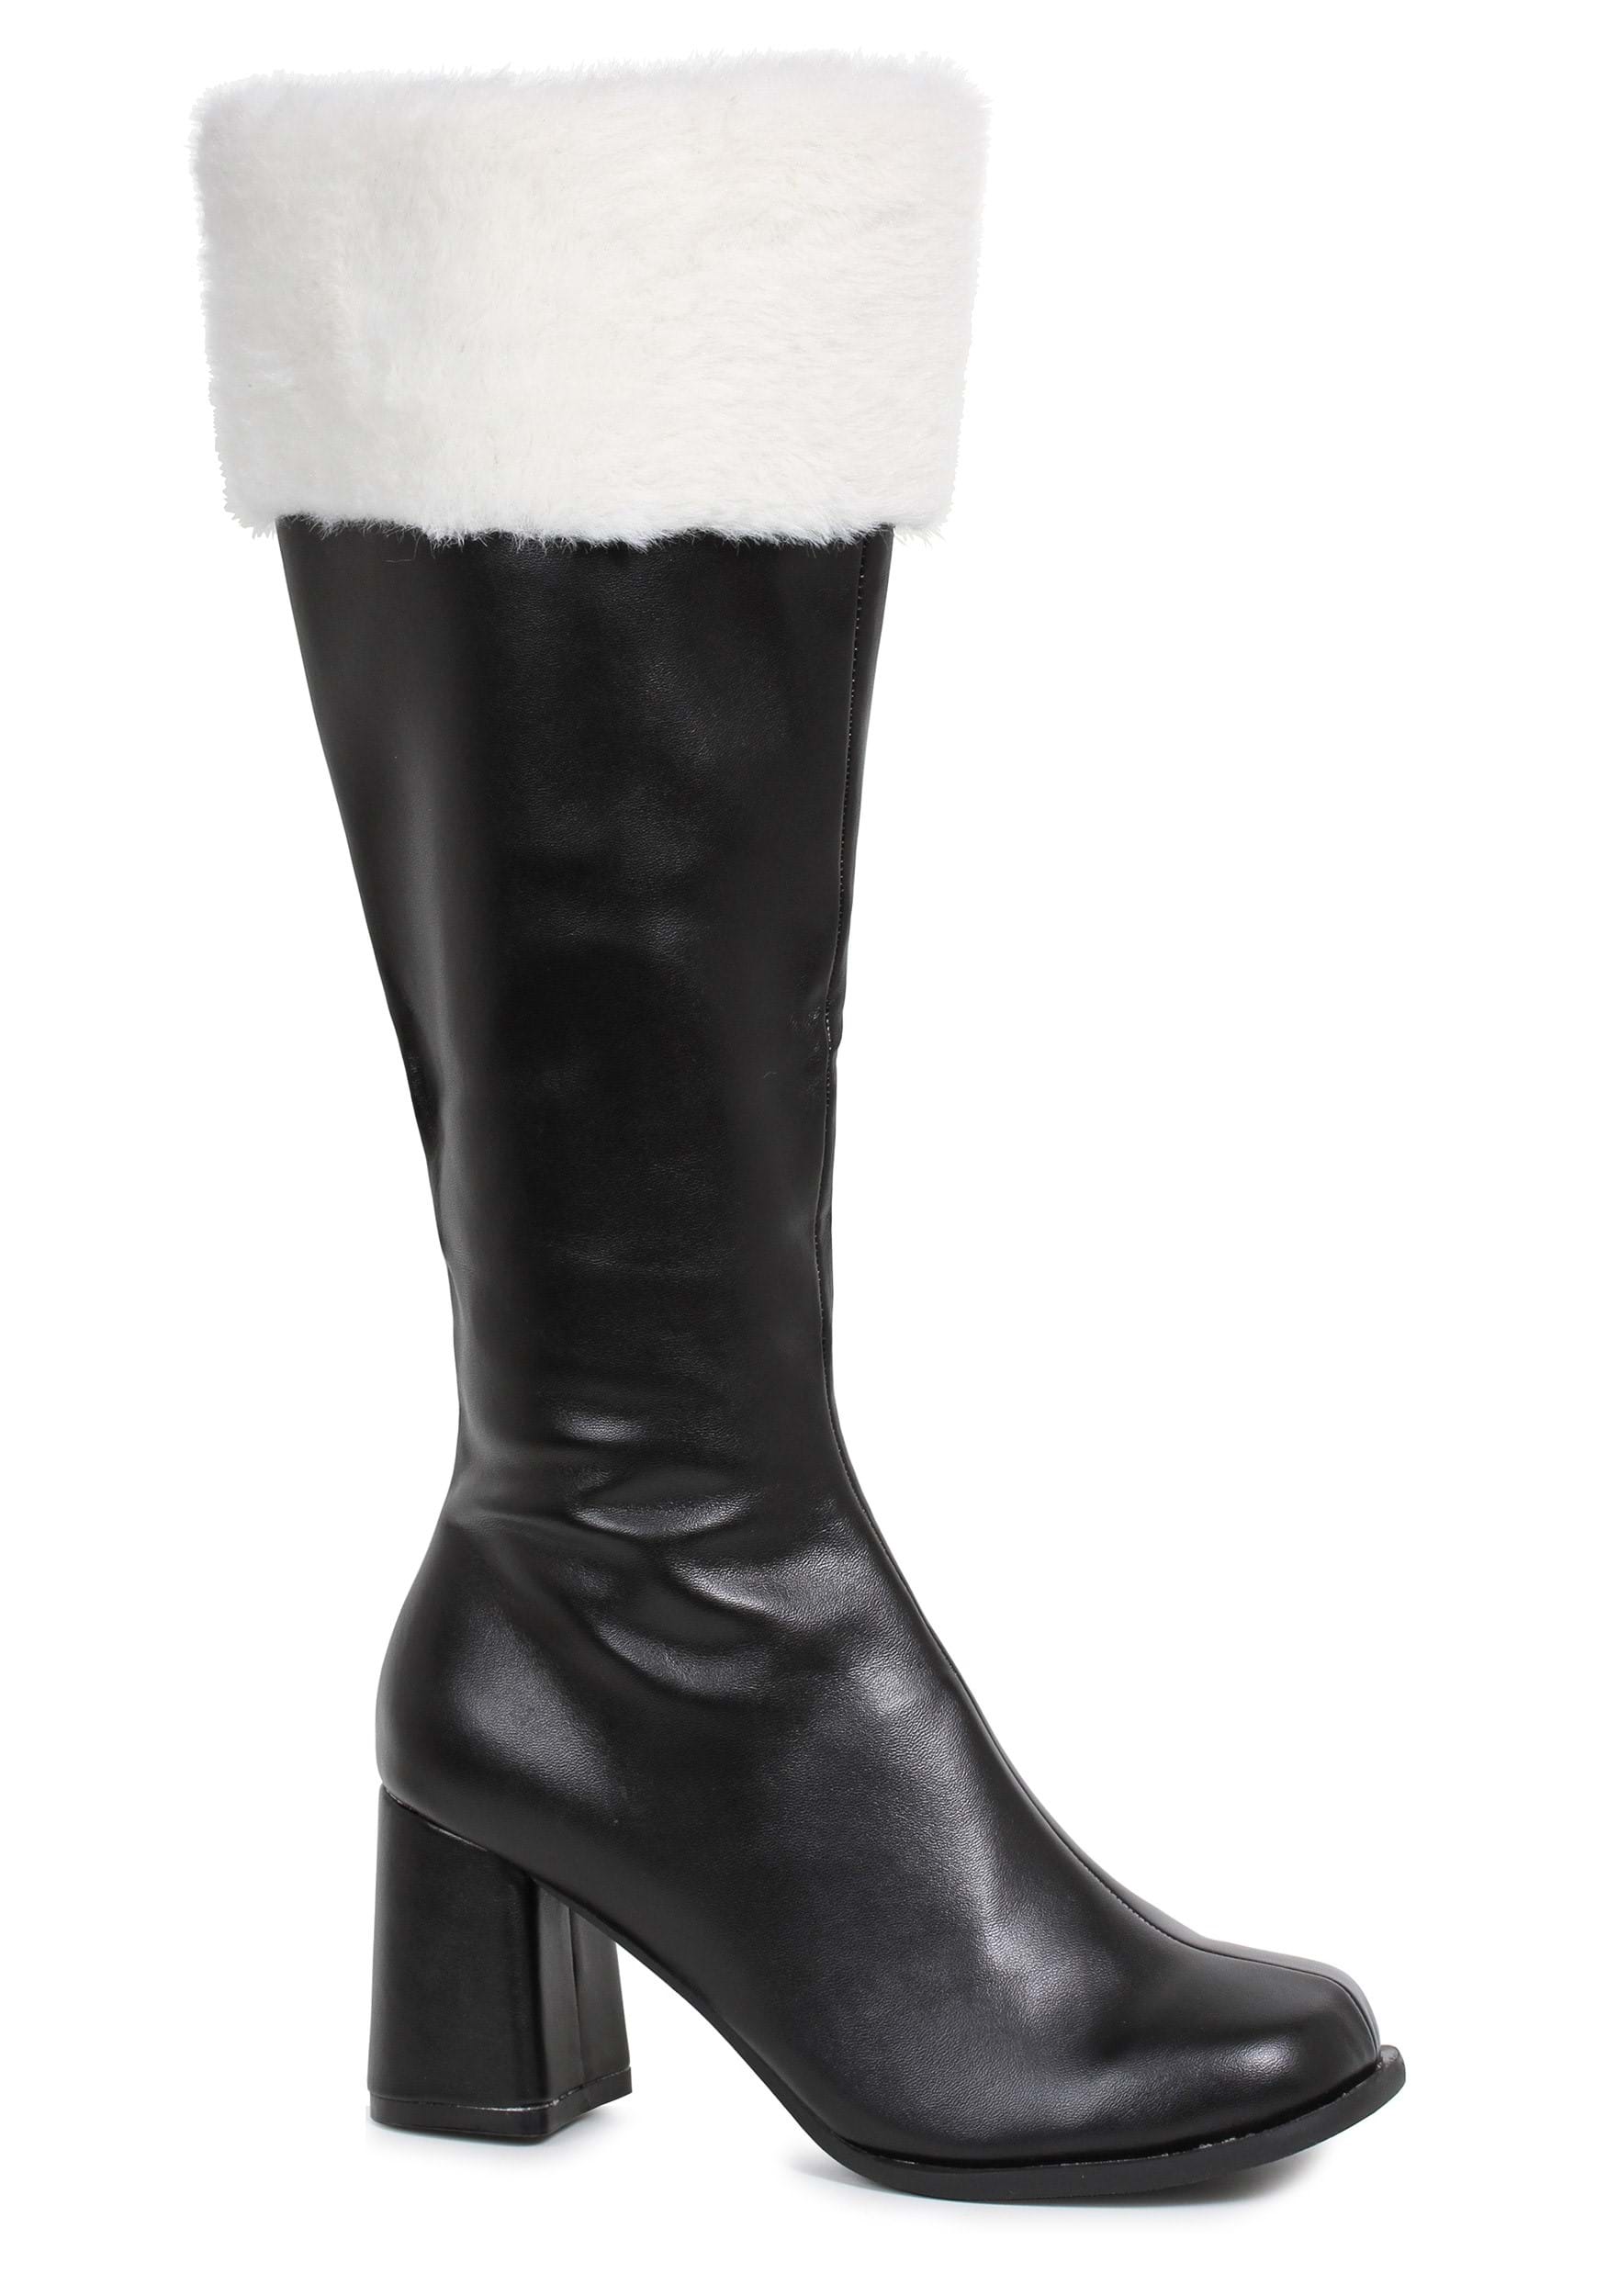 Women's Gogo Fur Topped Boots